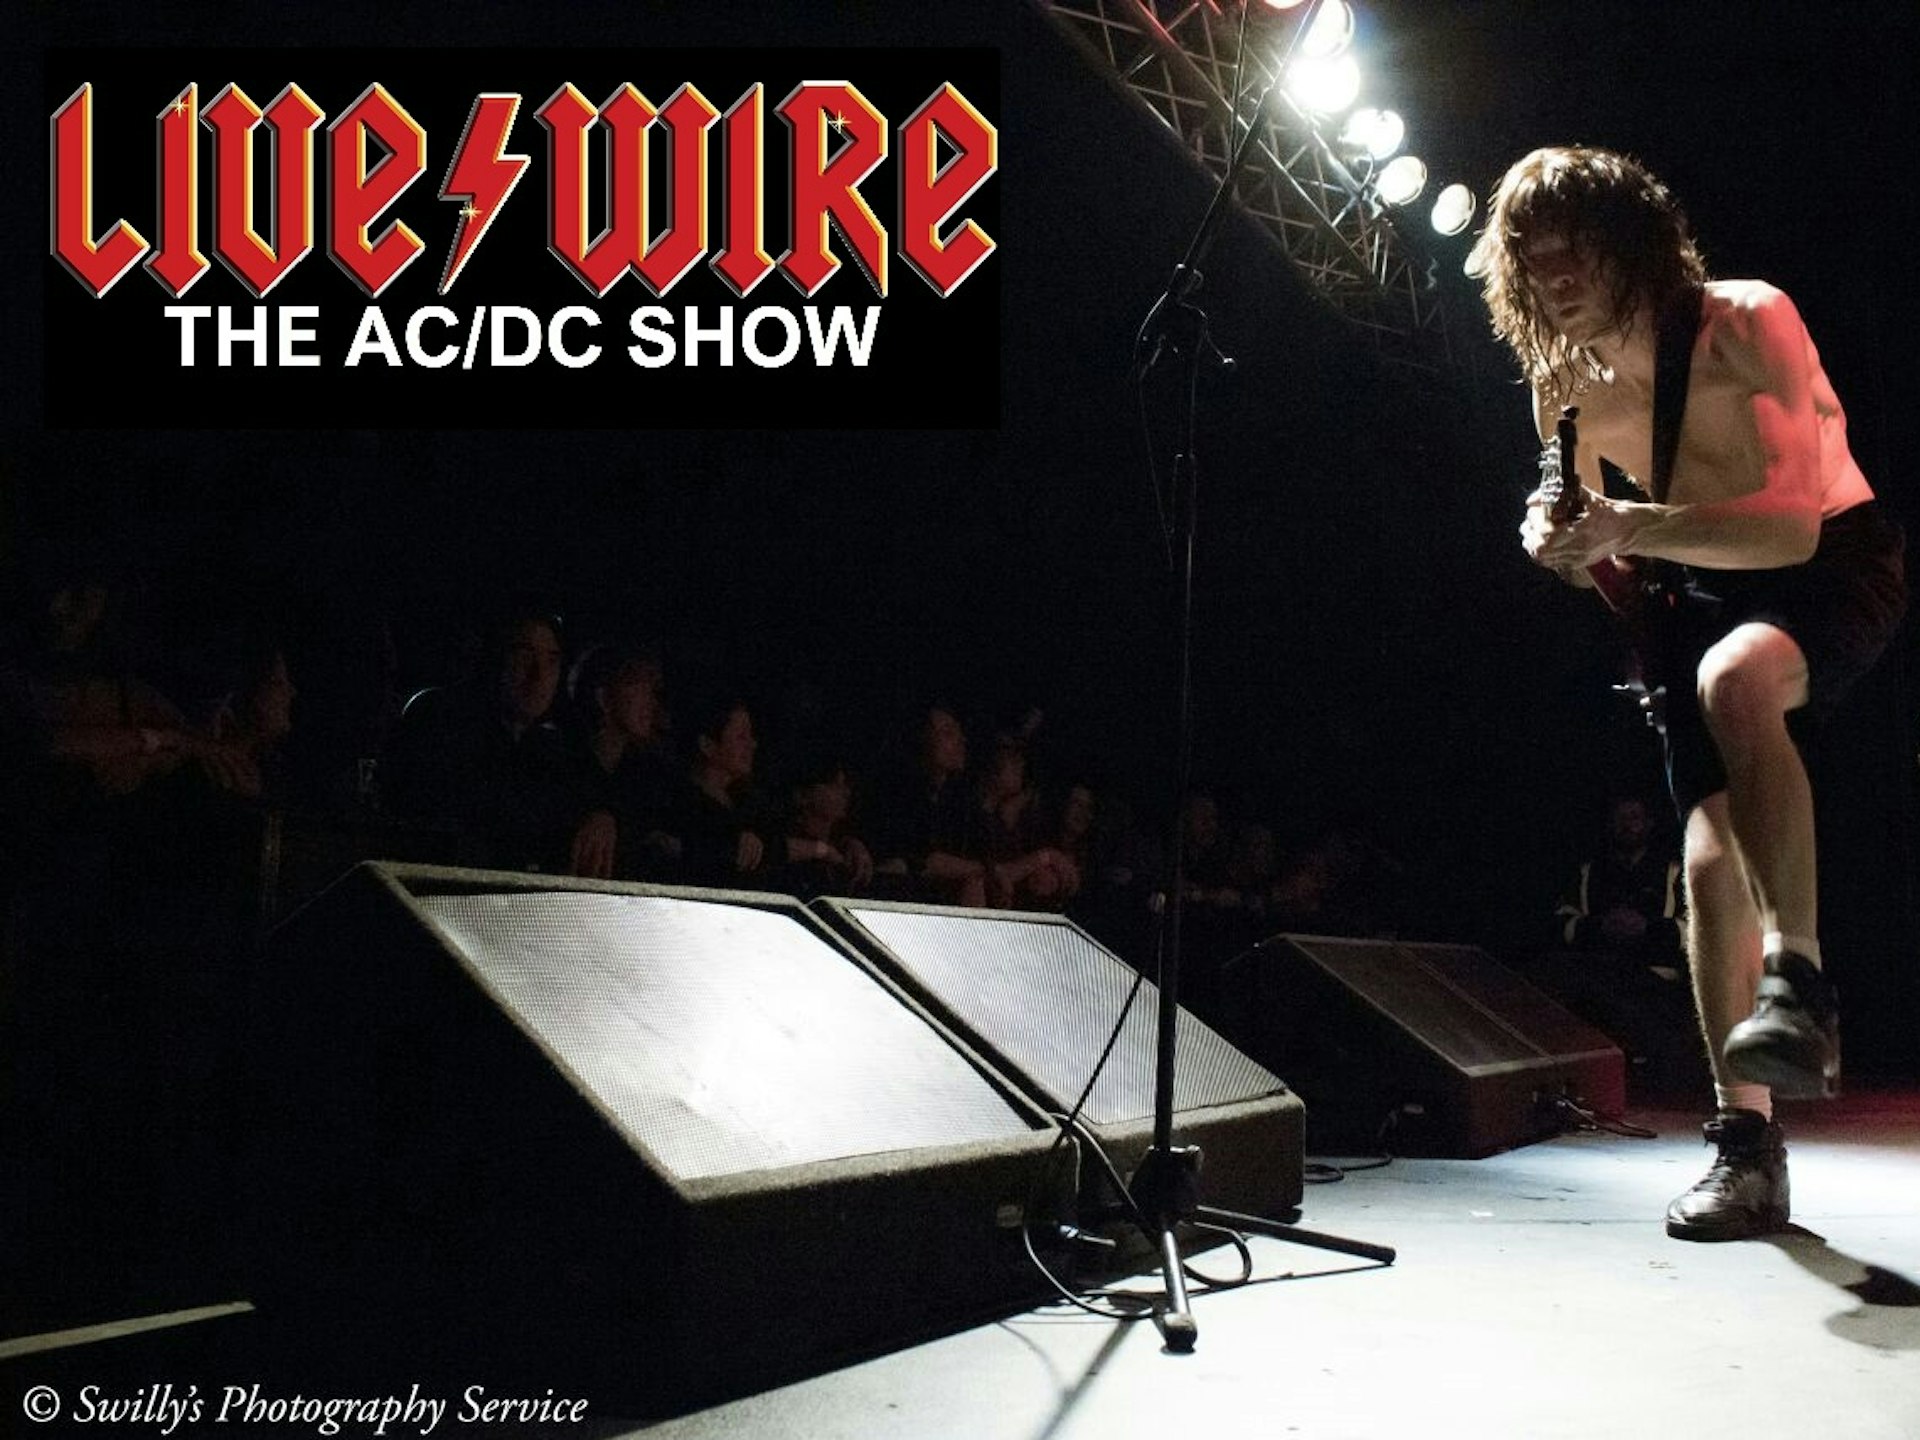 LIVE WIRE - The ULTIMATE AC/DC Experience!